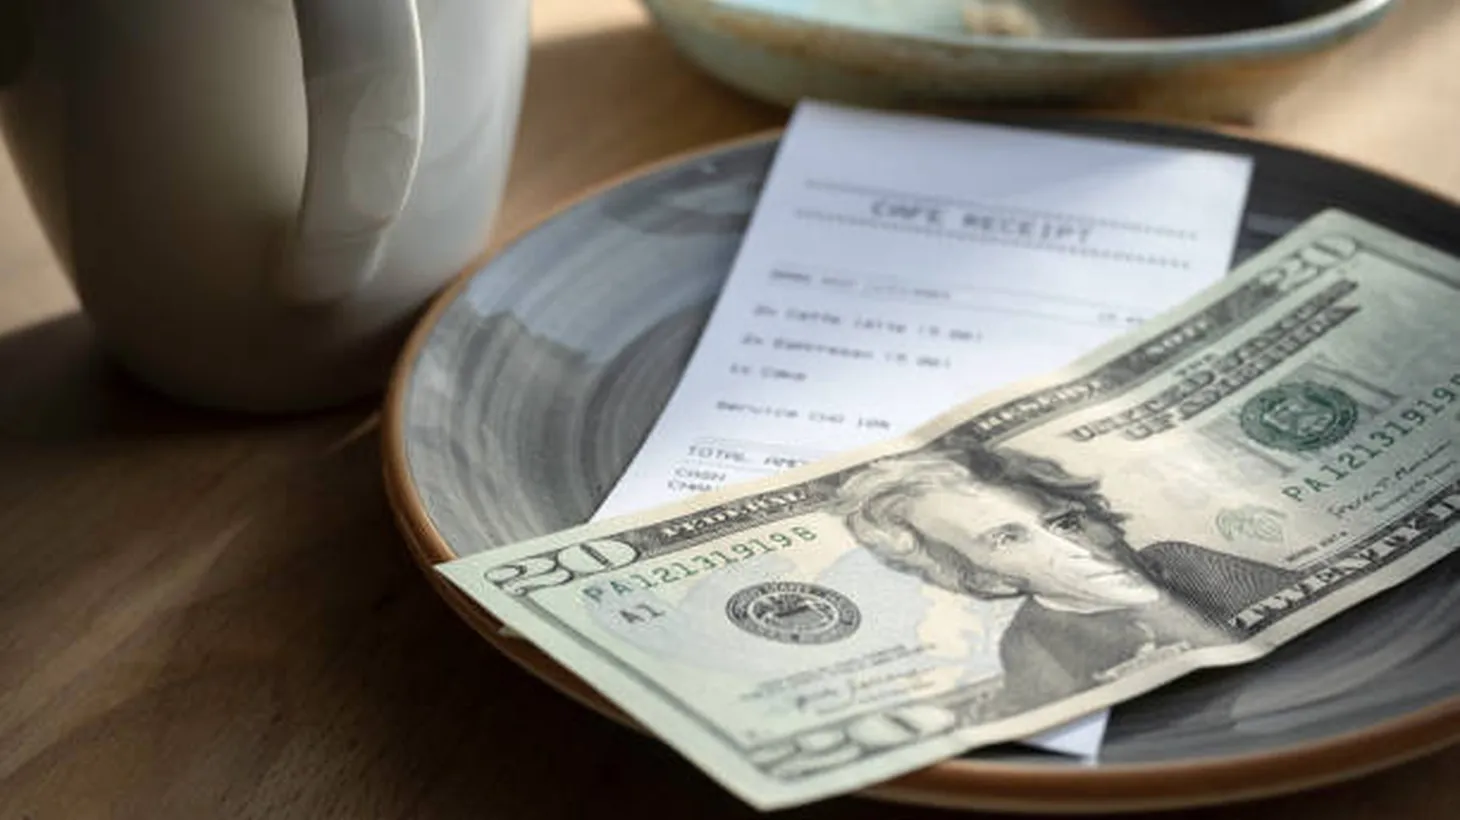 As of July 1, service charges will be banned from restaurant checks in California.